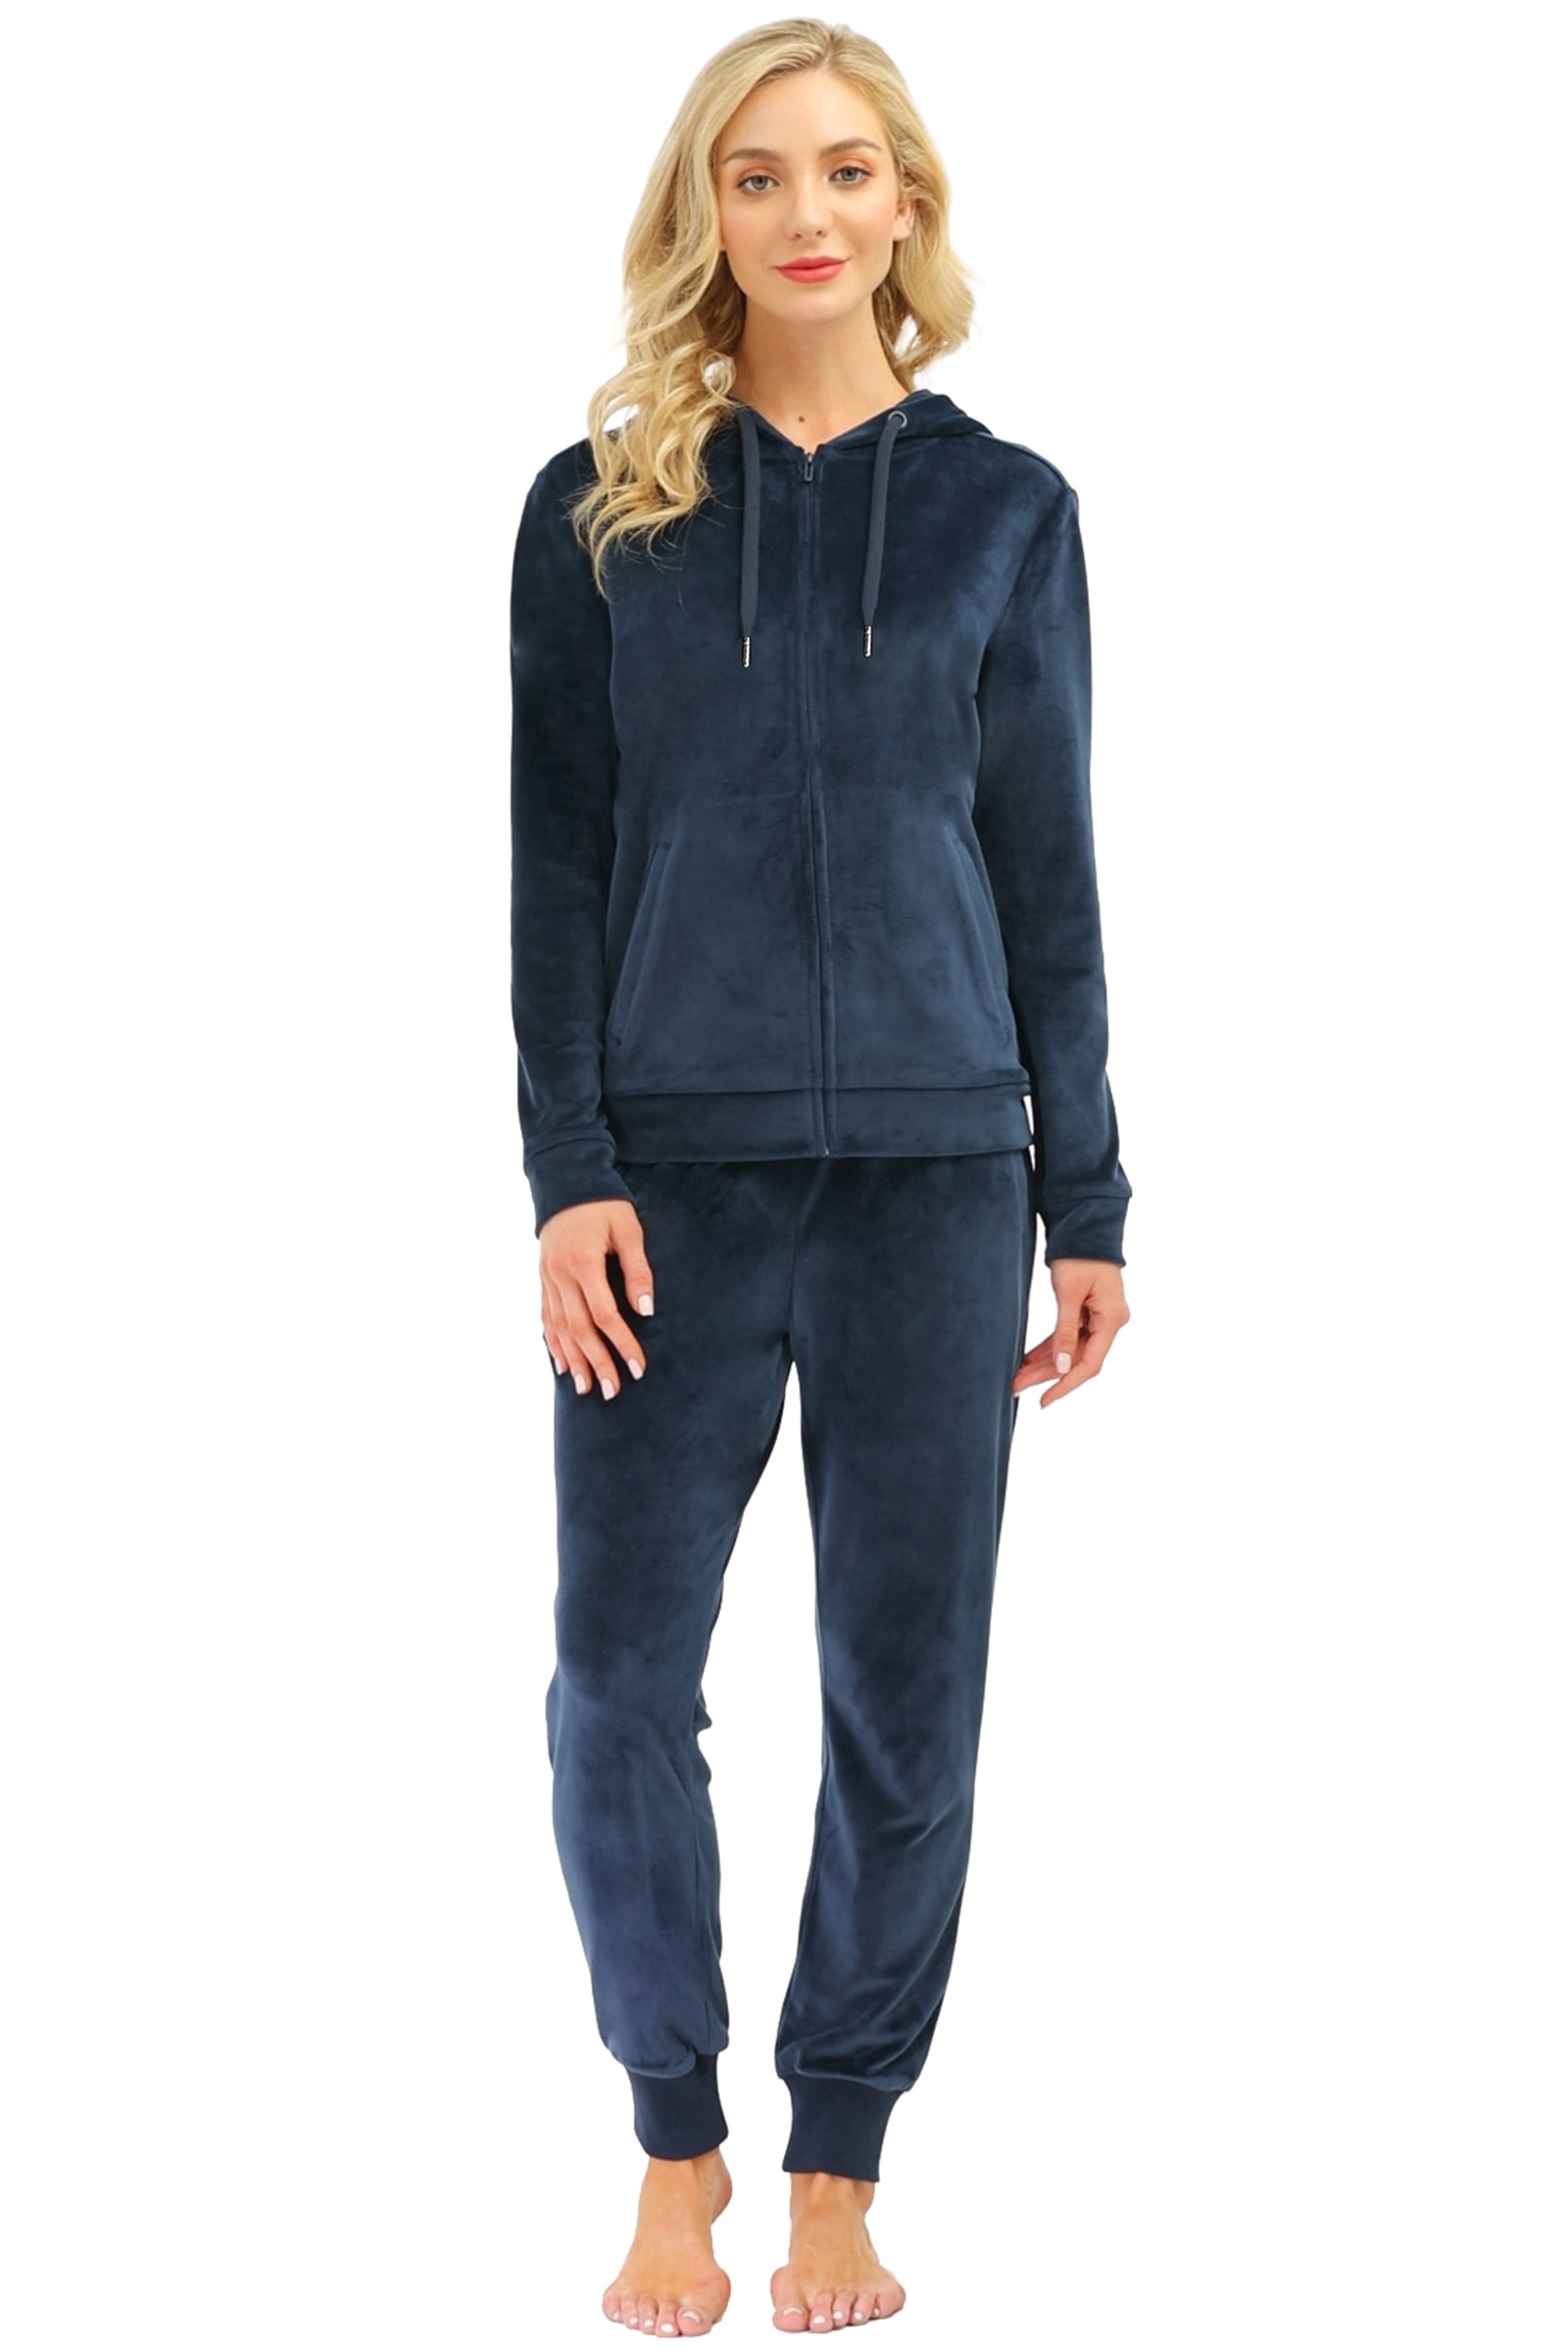 ANOTHER CHOICE Women Velour Tracksuit,Soft Velour Sweatsuit Sets for ...